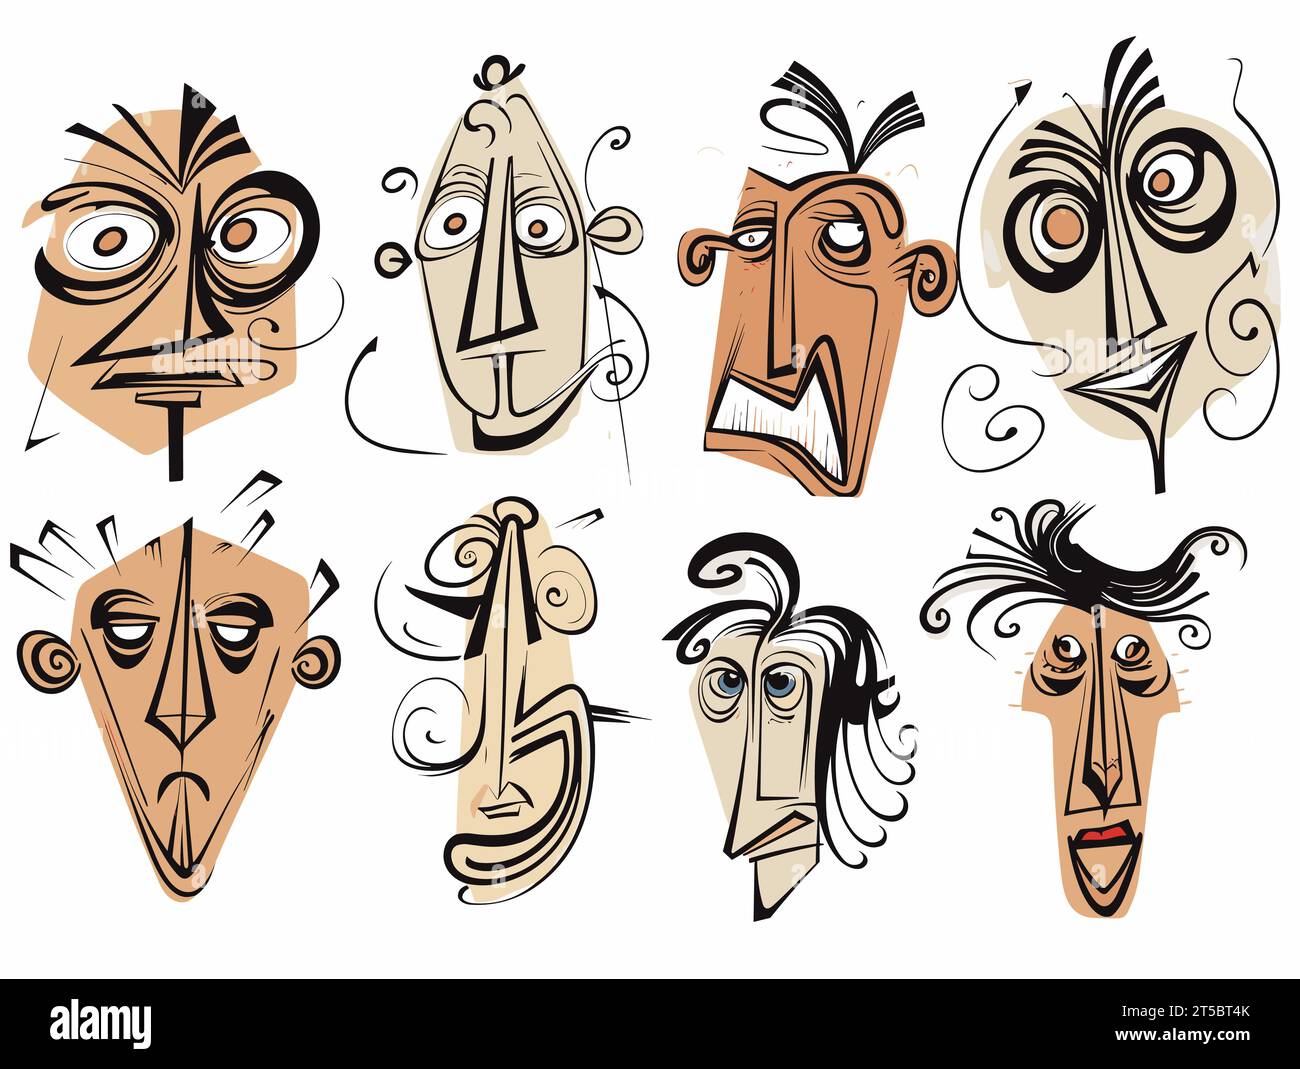 Drawing of 8 cartoon faces illustration separated, sweeping overdrawn lines. Stock Vector